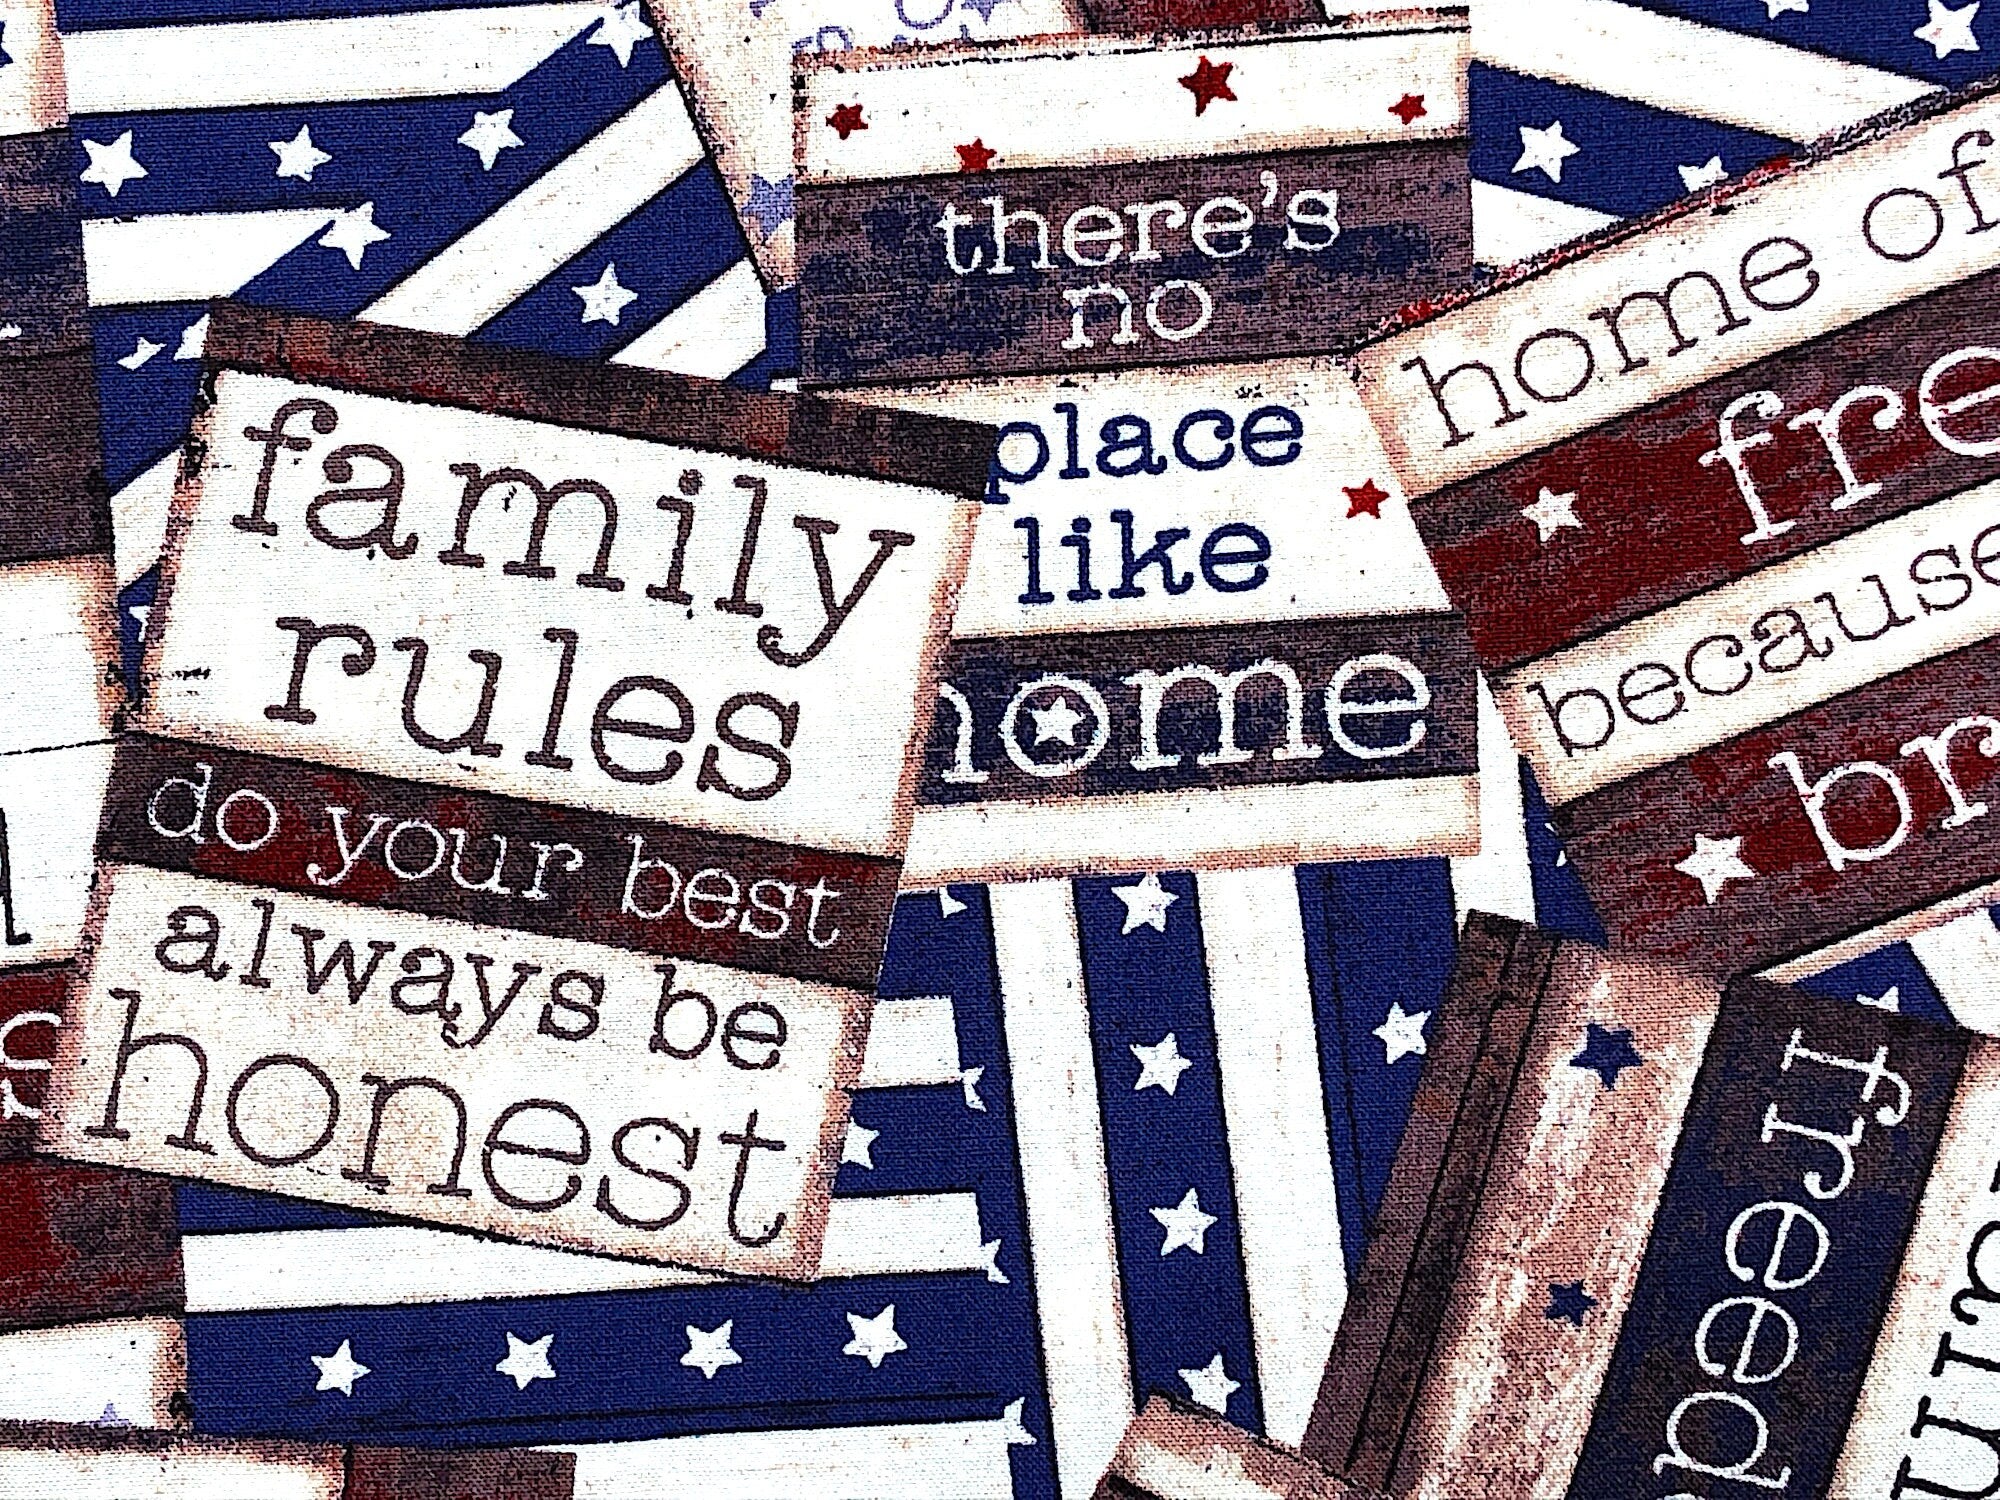 Close up of family rules do your best always be honest.